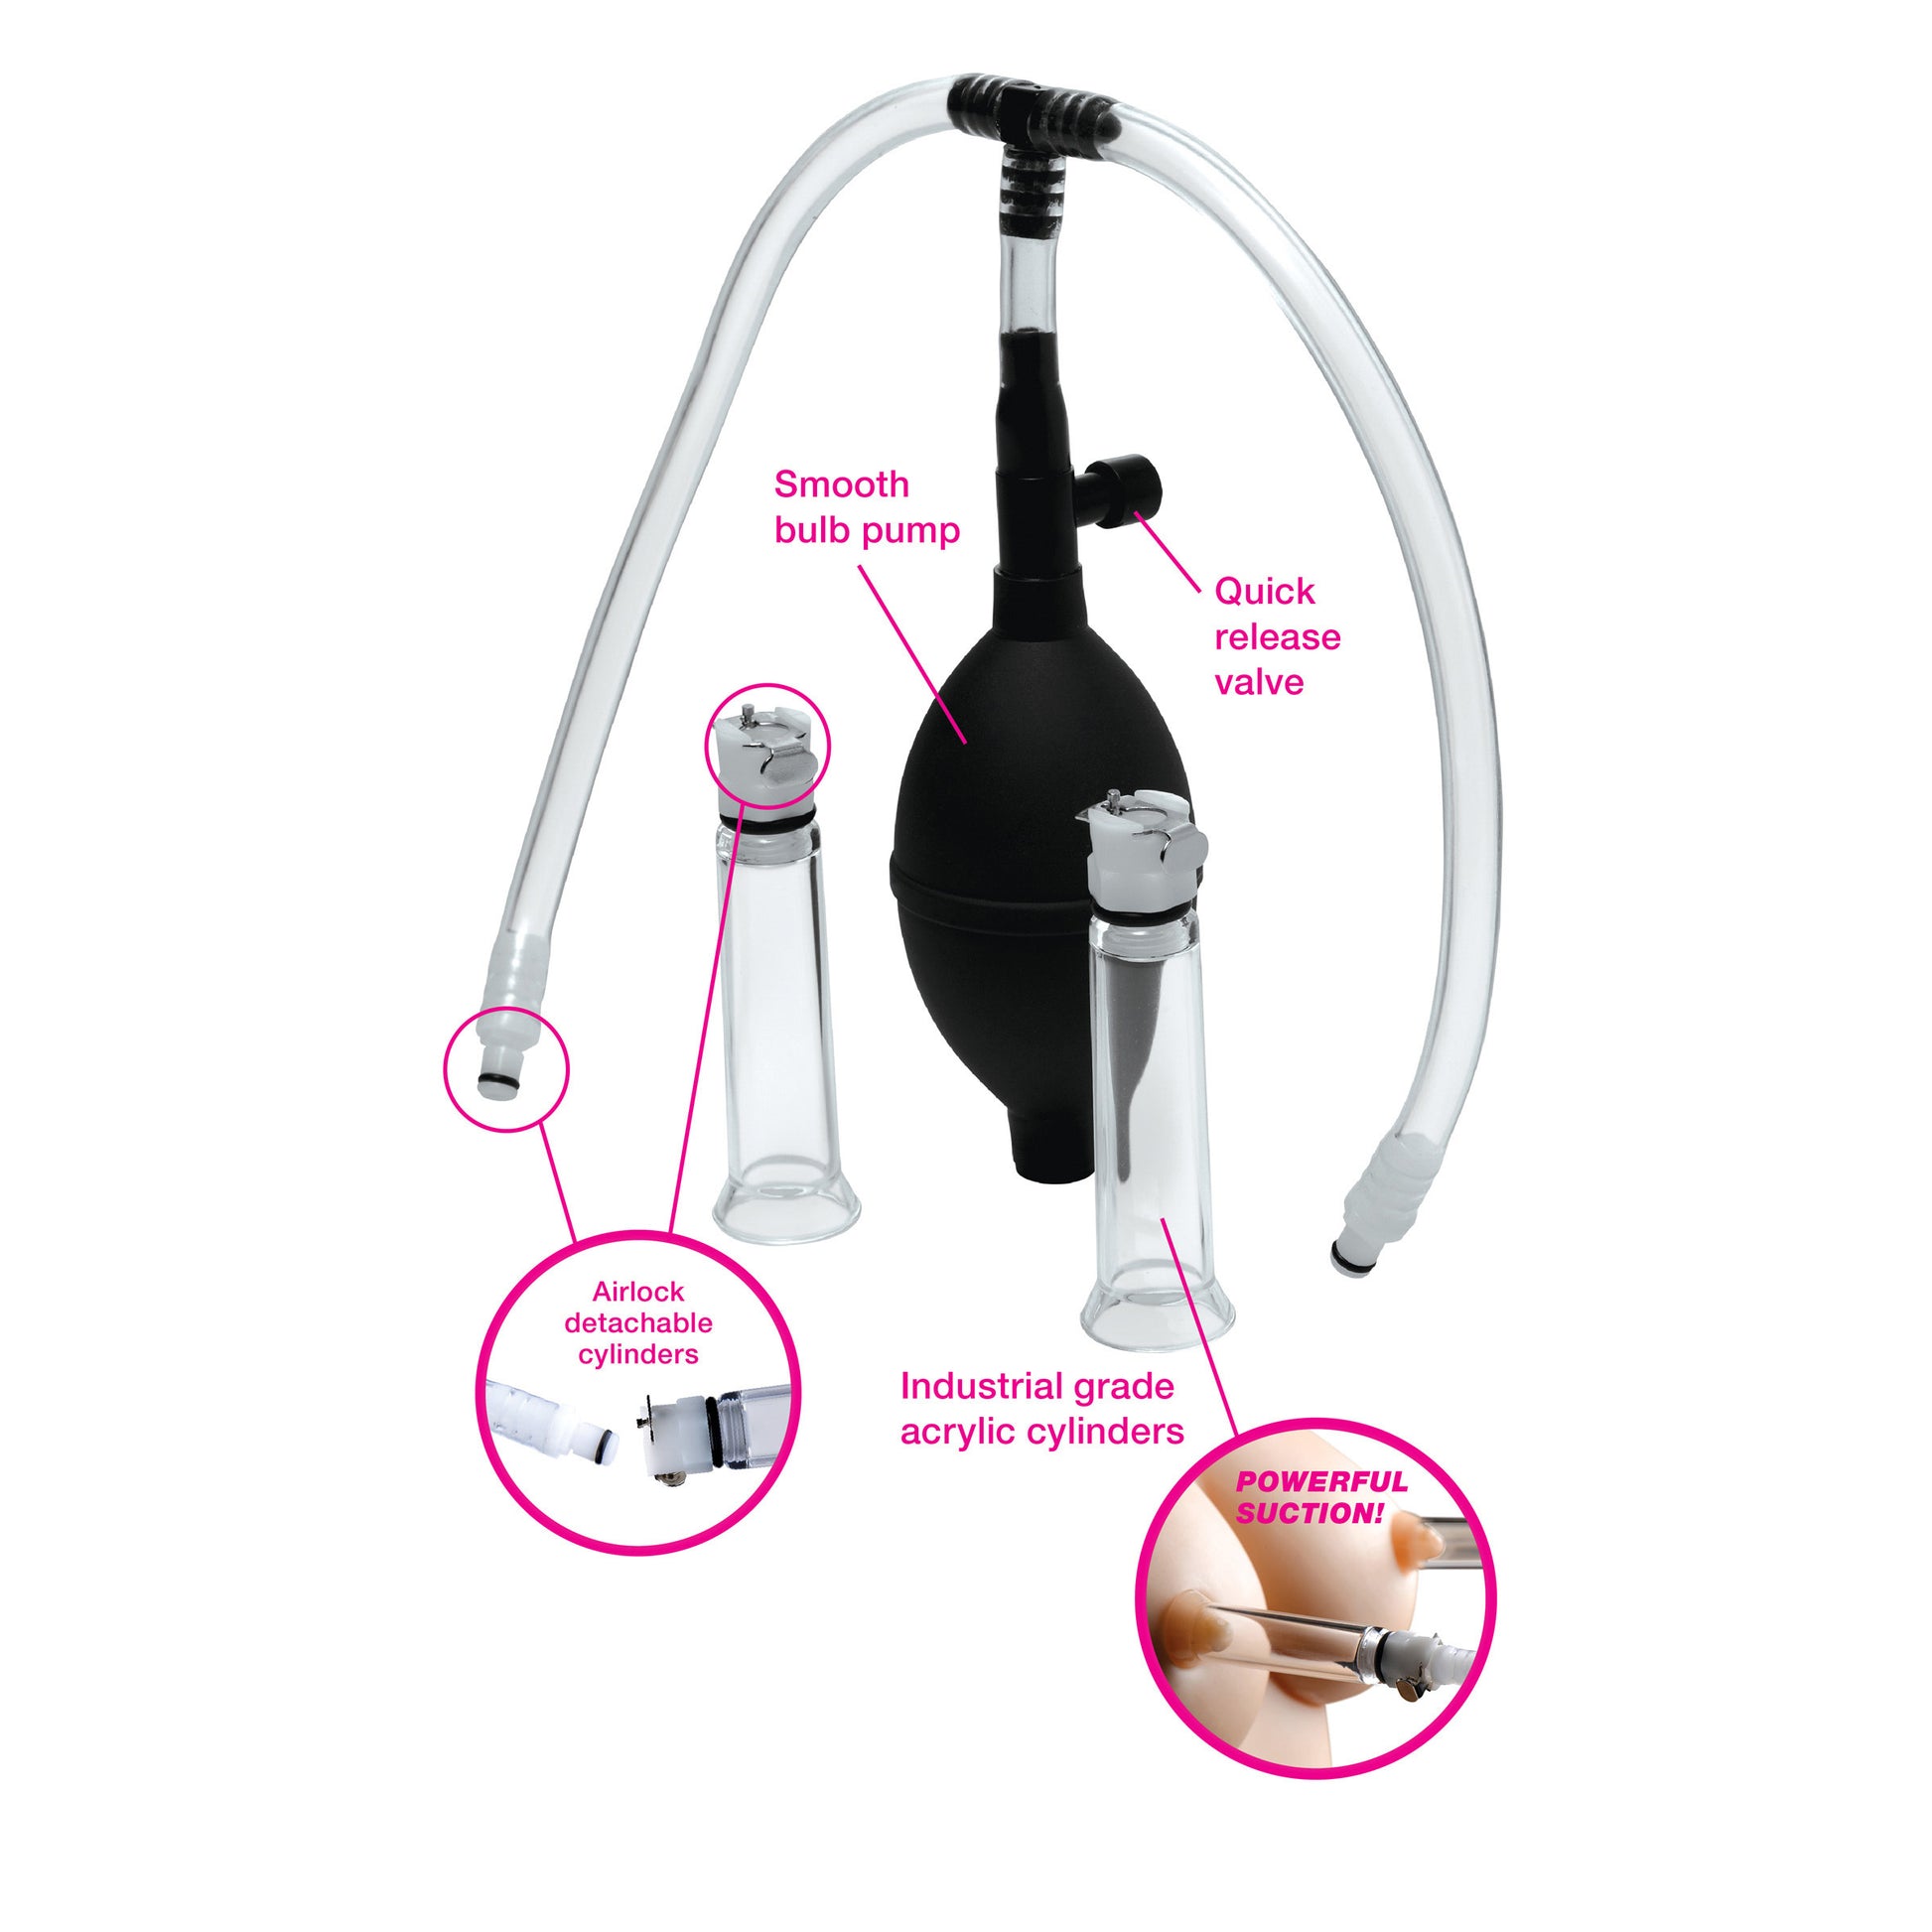 Nipple Pumping System with Dual Detachable Acrylic Cylinders - UABDSM